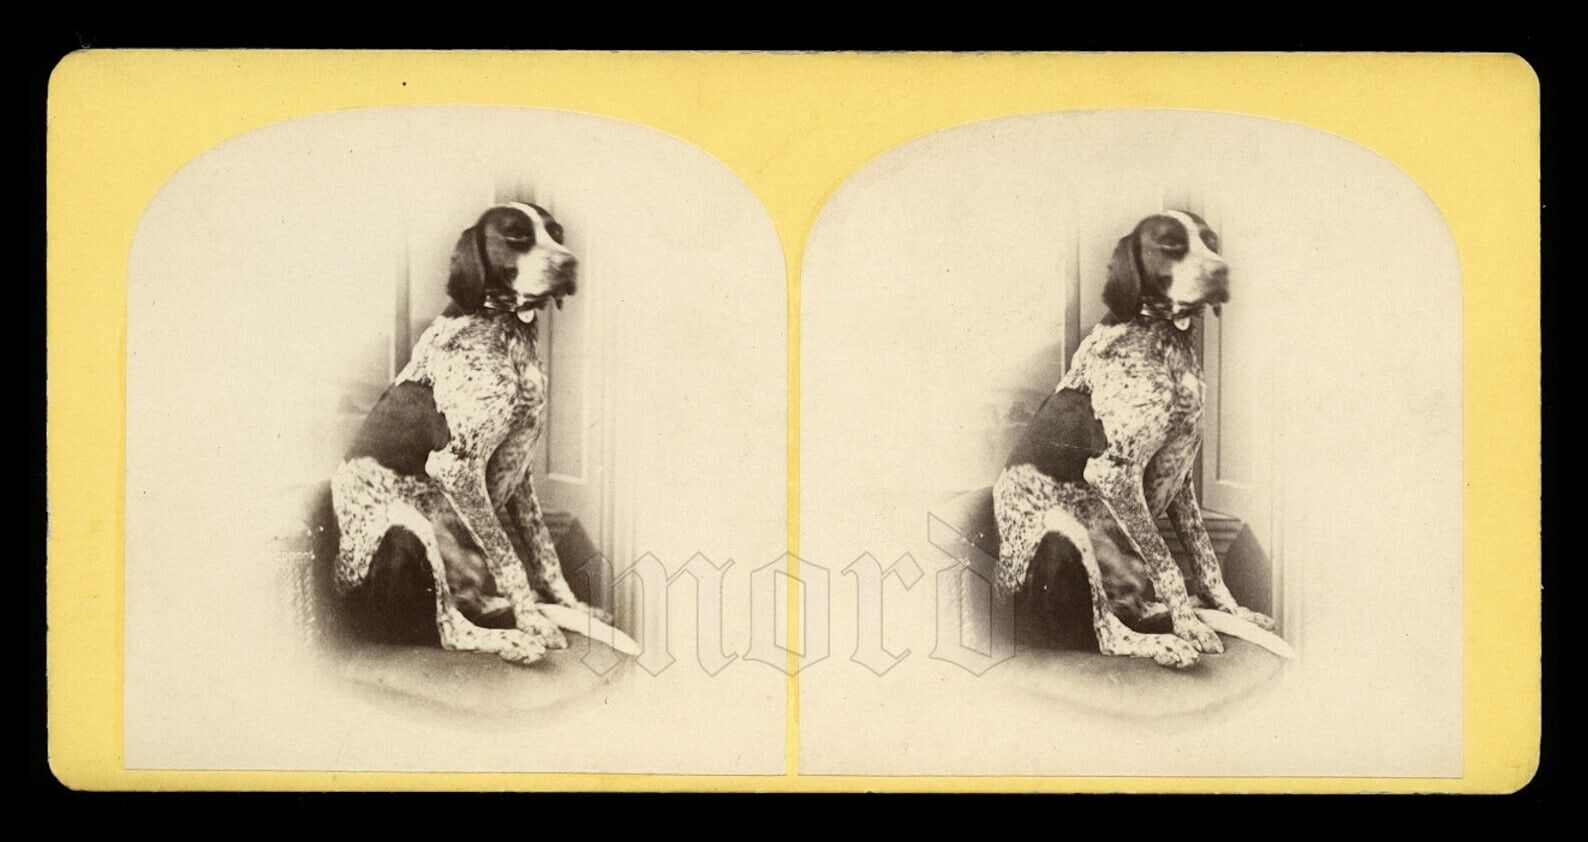 Beautiful 1800s Stereoview Photo of an ENGLISH POINTER Dog